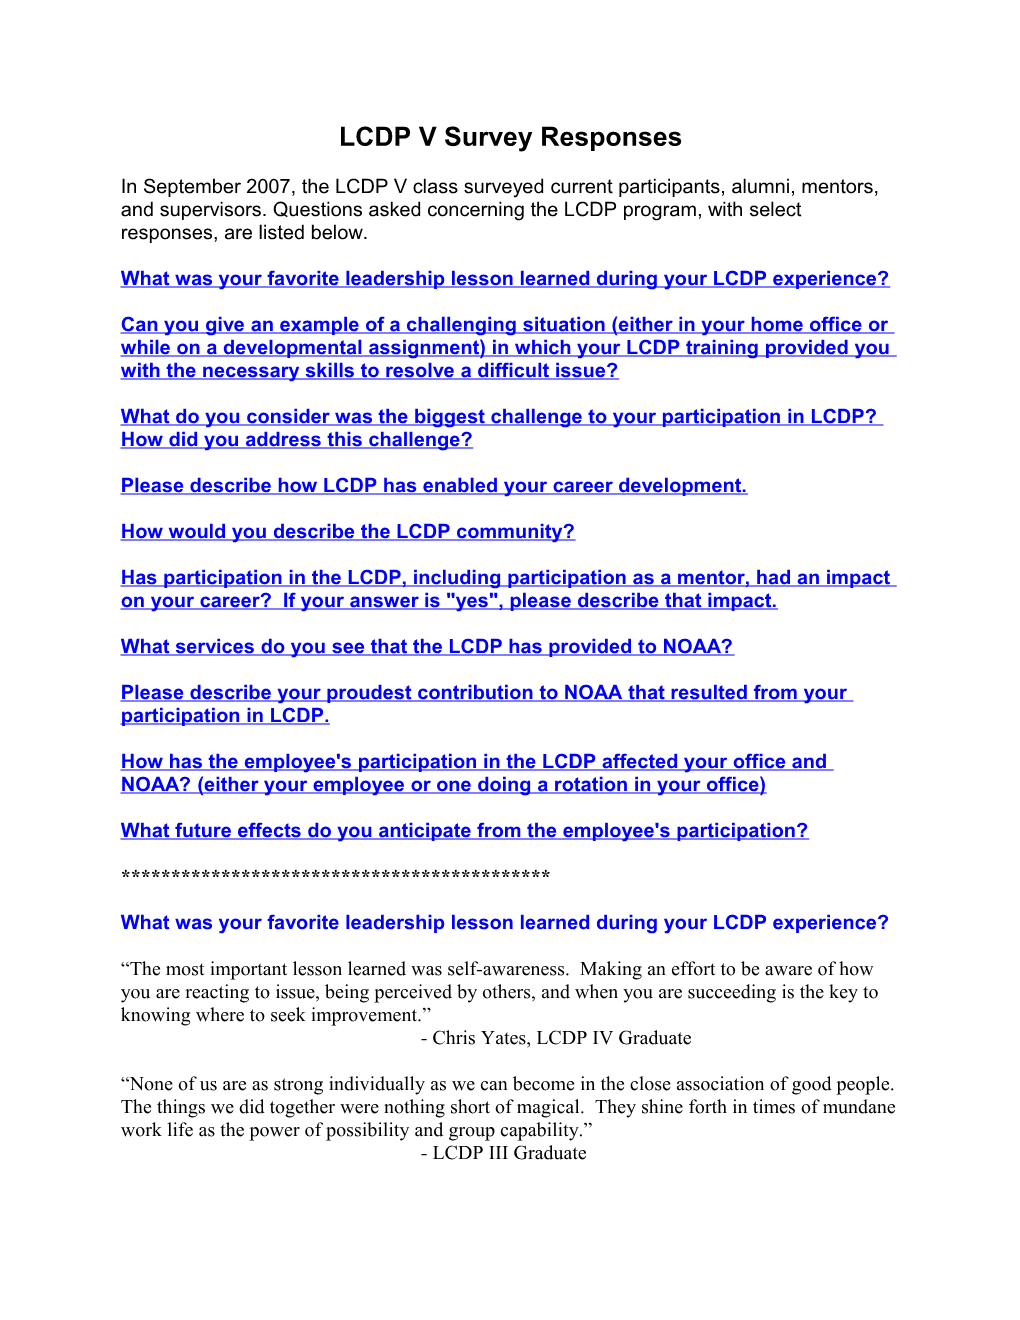 LCDP Questionnaire Responses